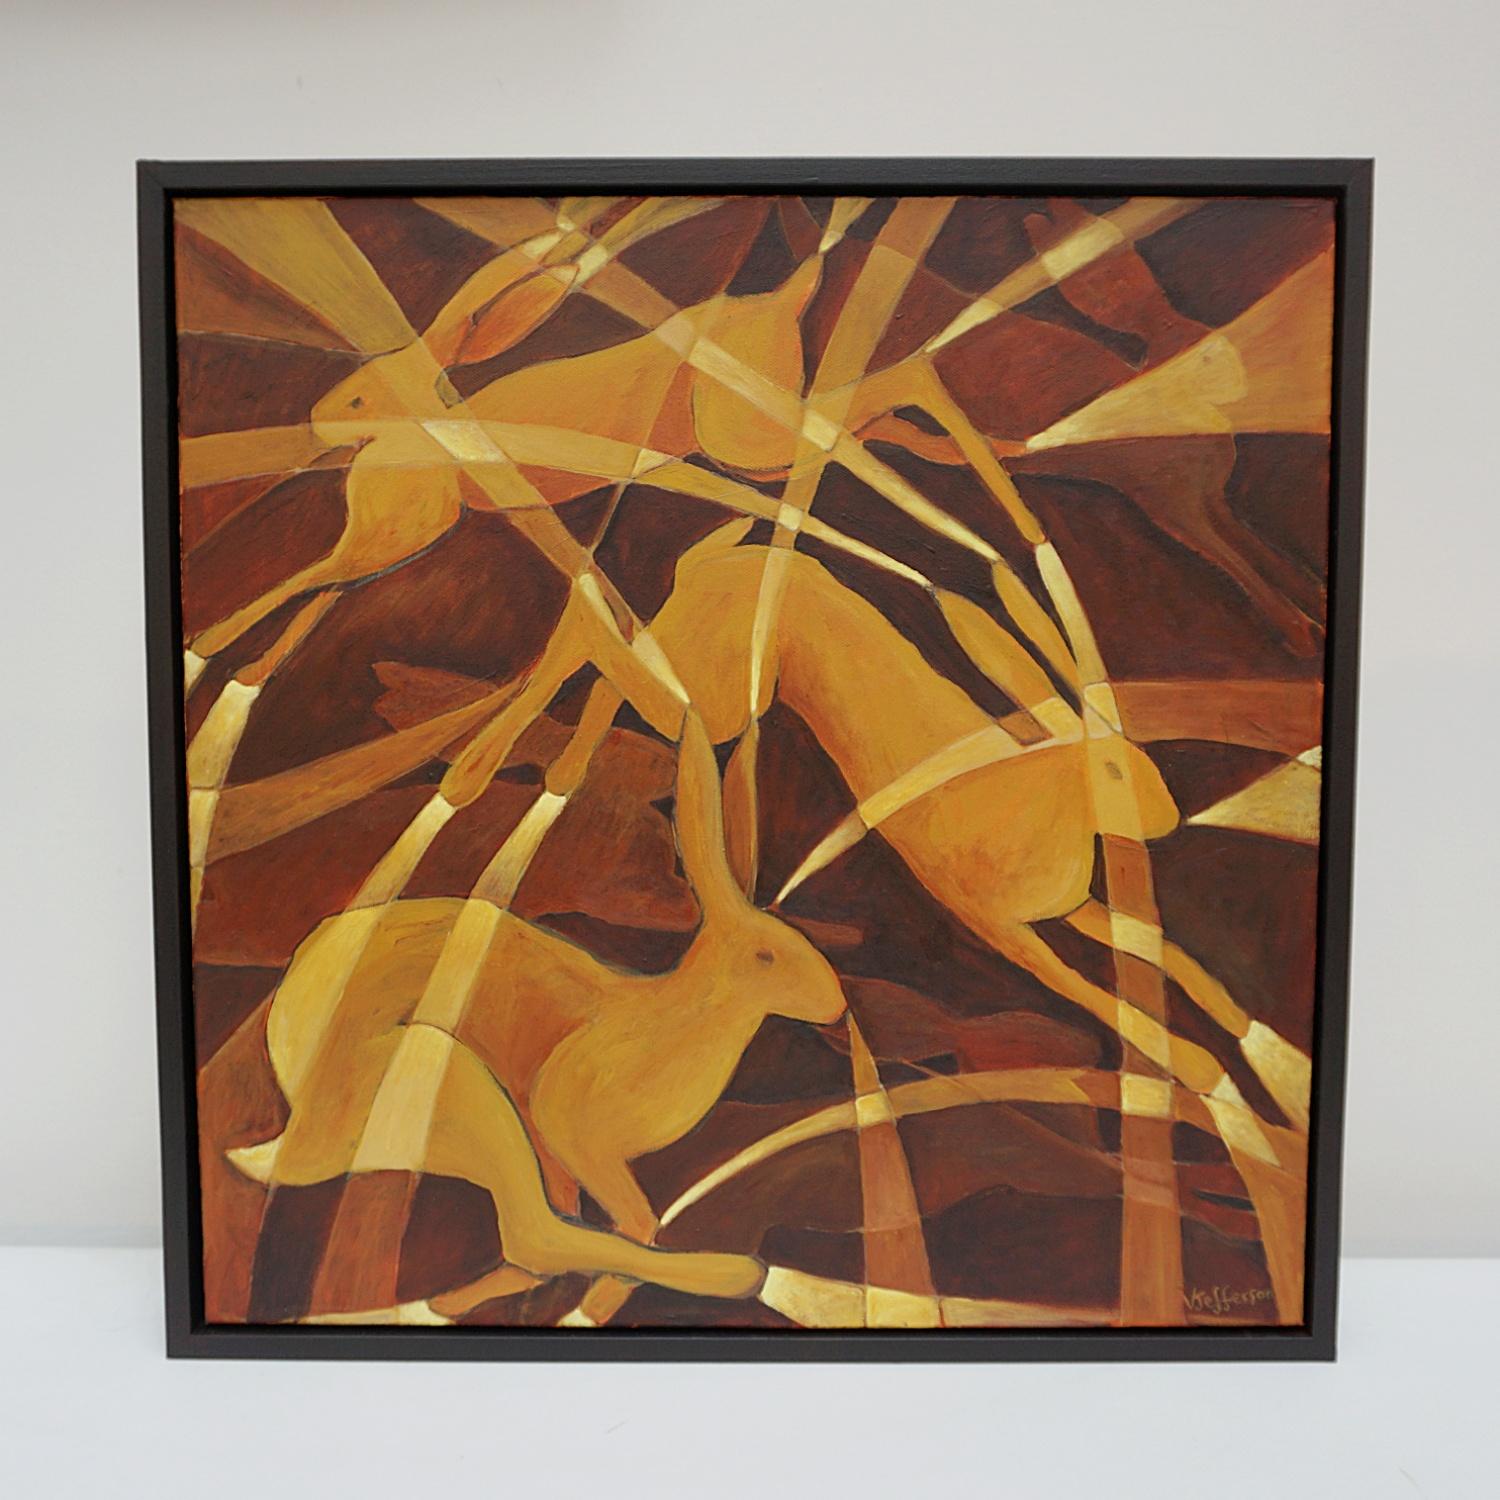 'Golden Hares' An Art Deco style contemporary painting by Vera Jefferson depicting golden hares leaping amongst a stylised background. Signed V Jefferson to lower right. 

Dimensions: H 54cm W 54cm D 5cm

Vera Jefferson trained at Goldsmiths